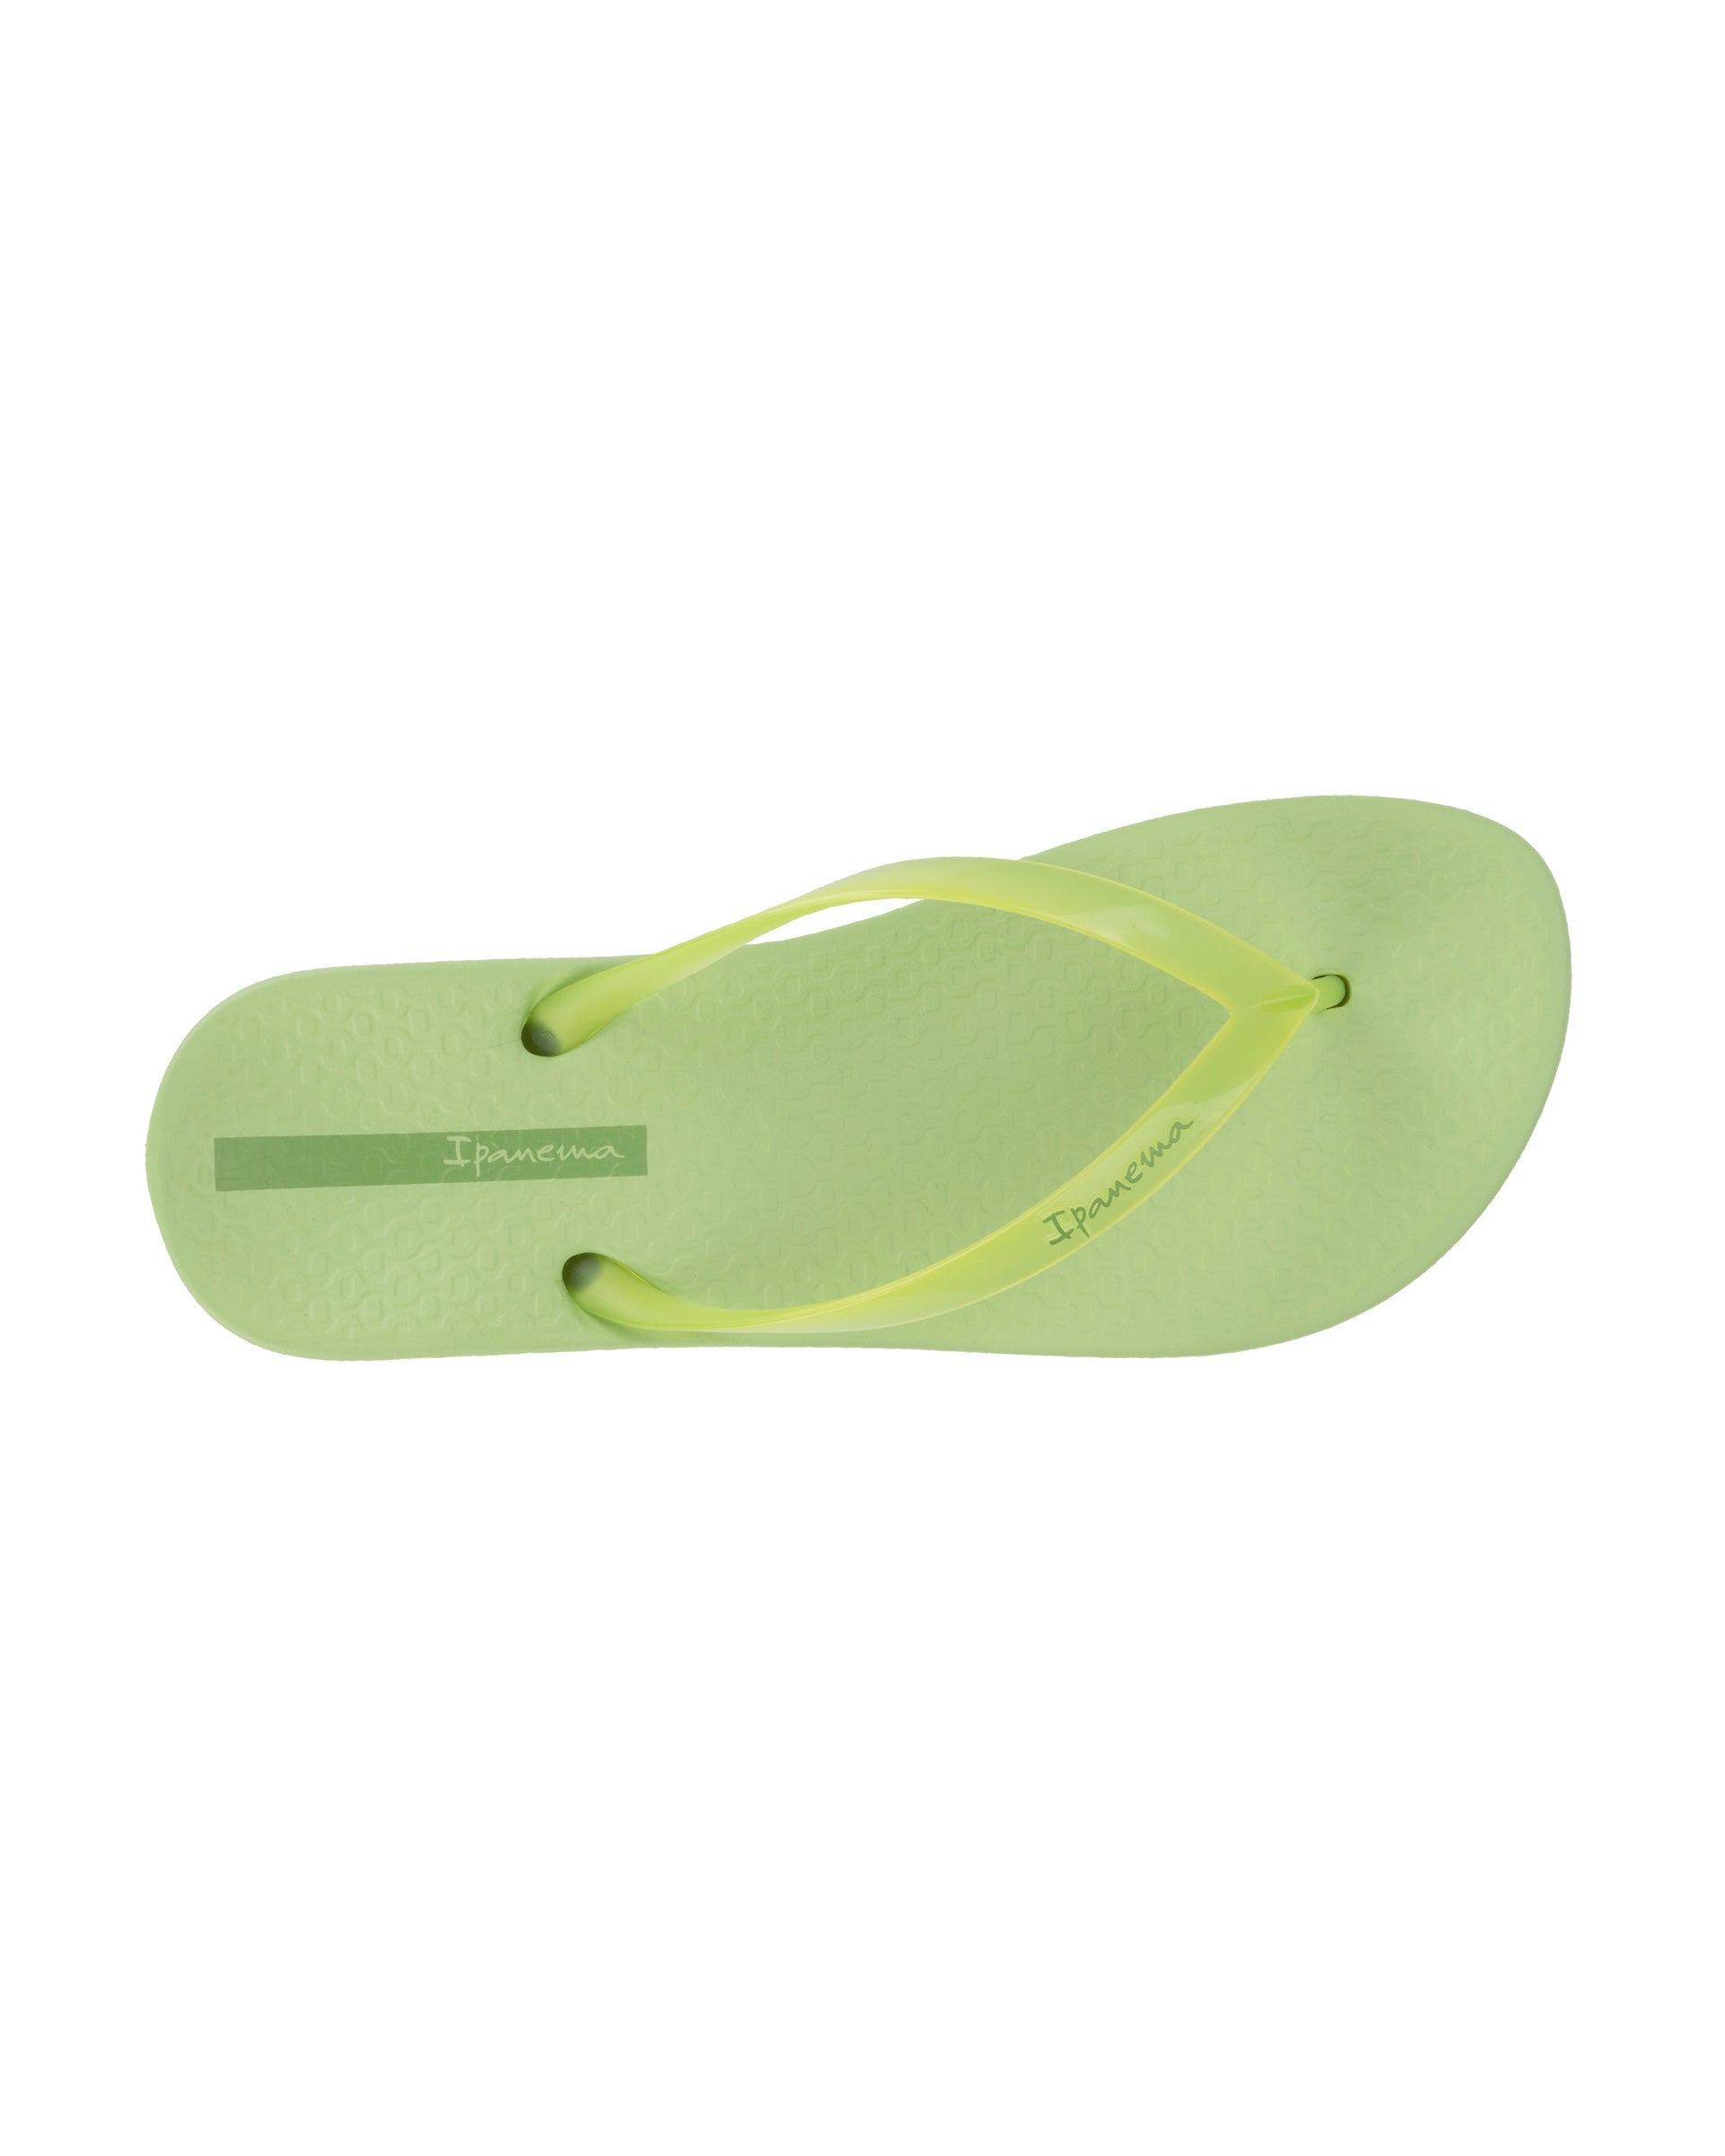 Top view of a green Ipanema Ana Connect women's flip flop with a clear green strap.